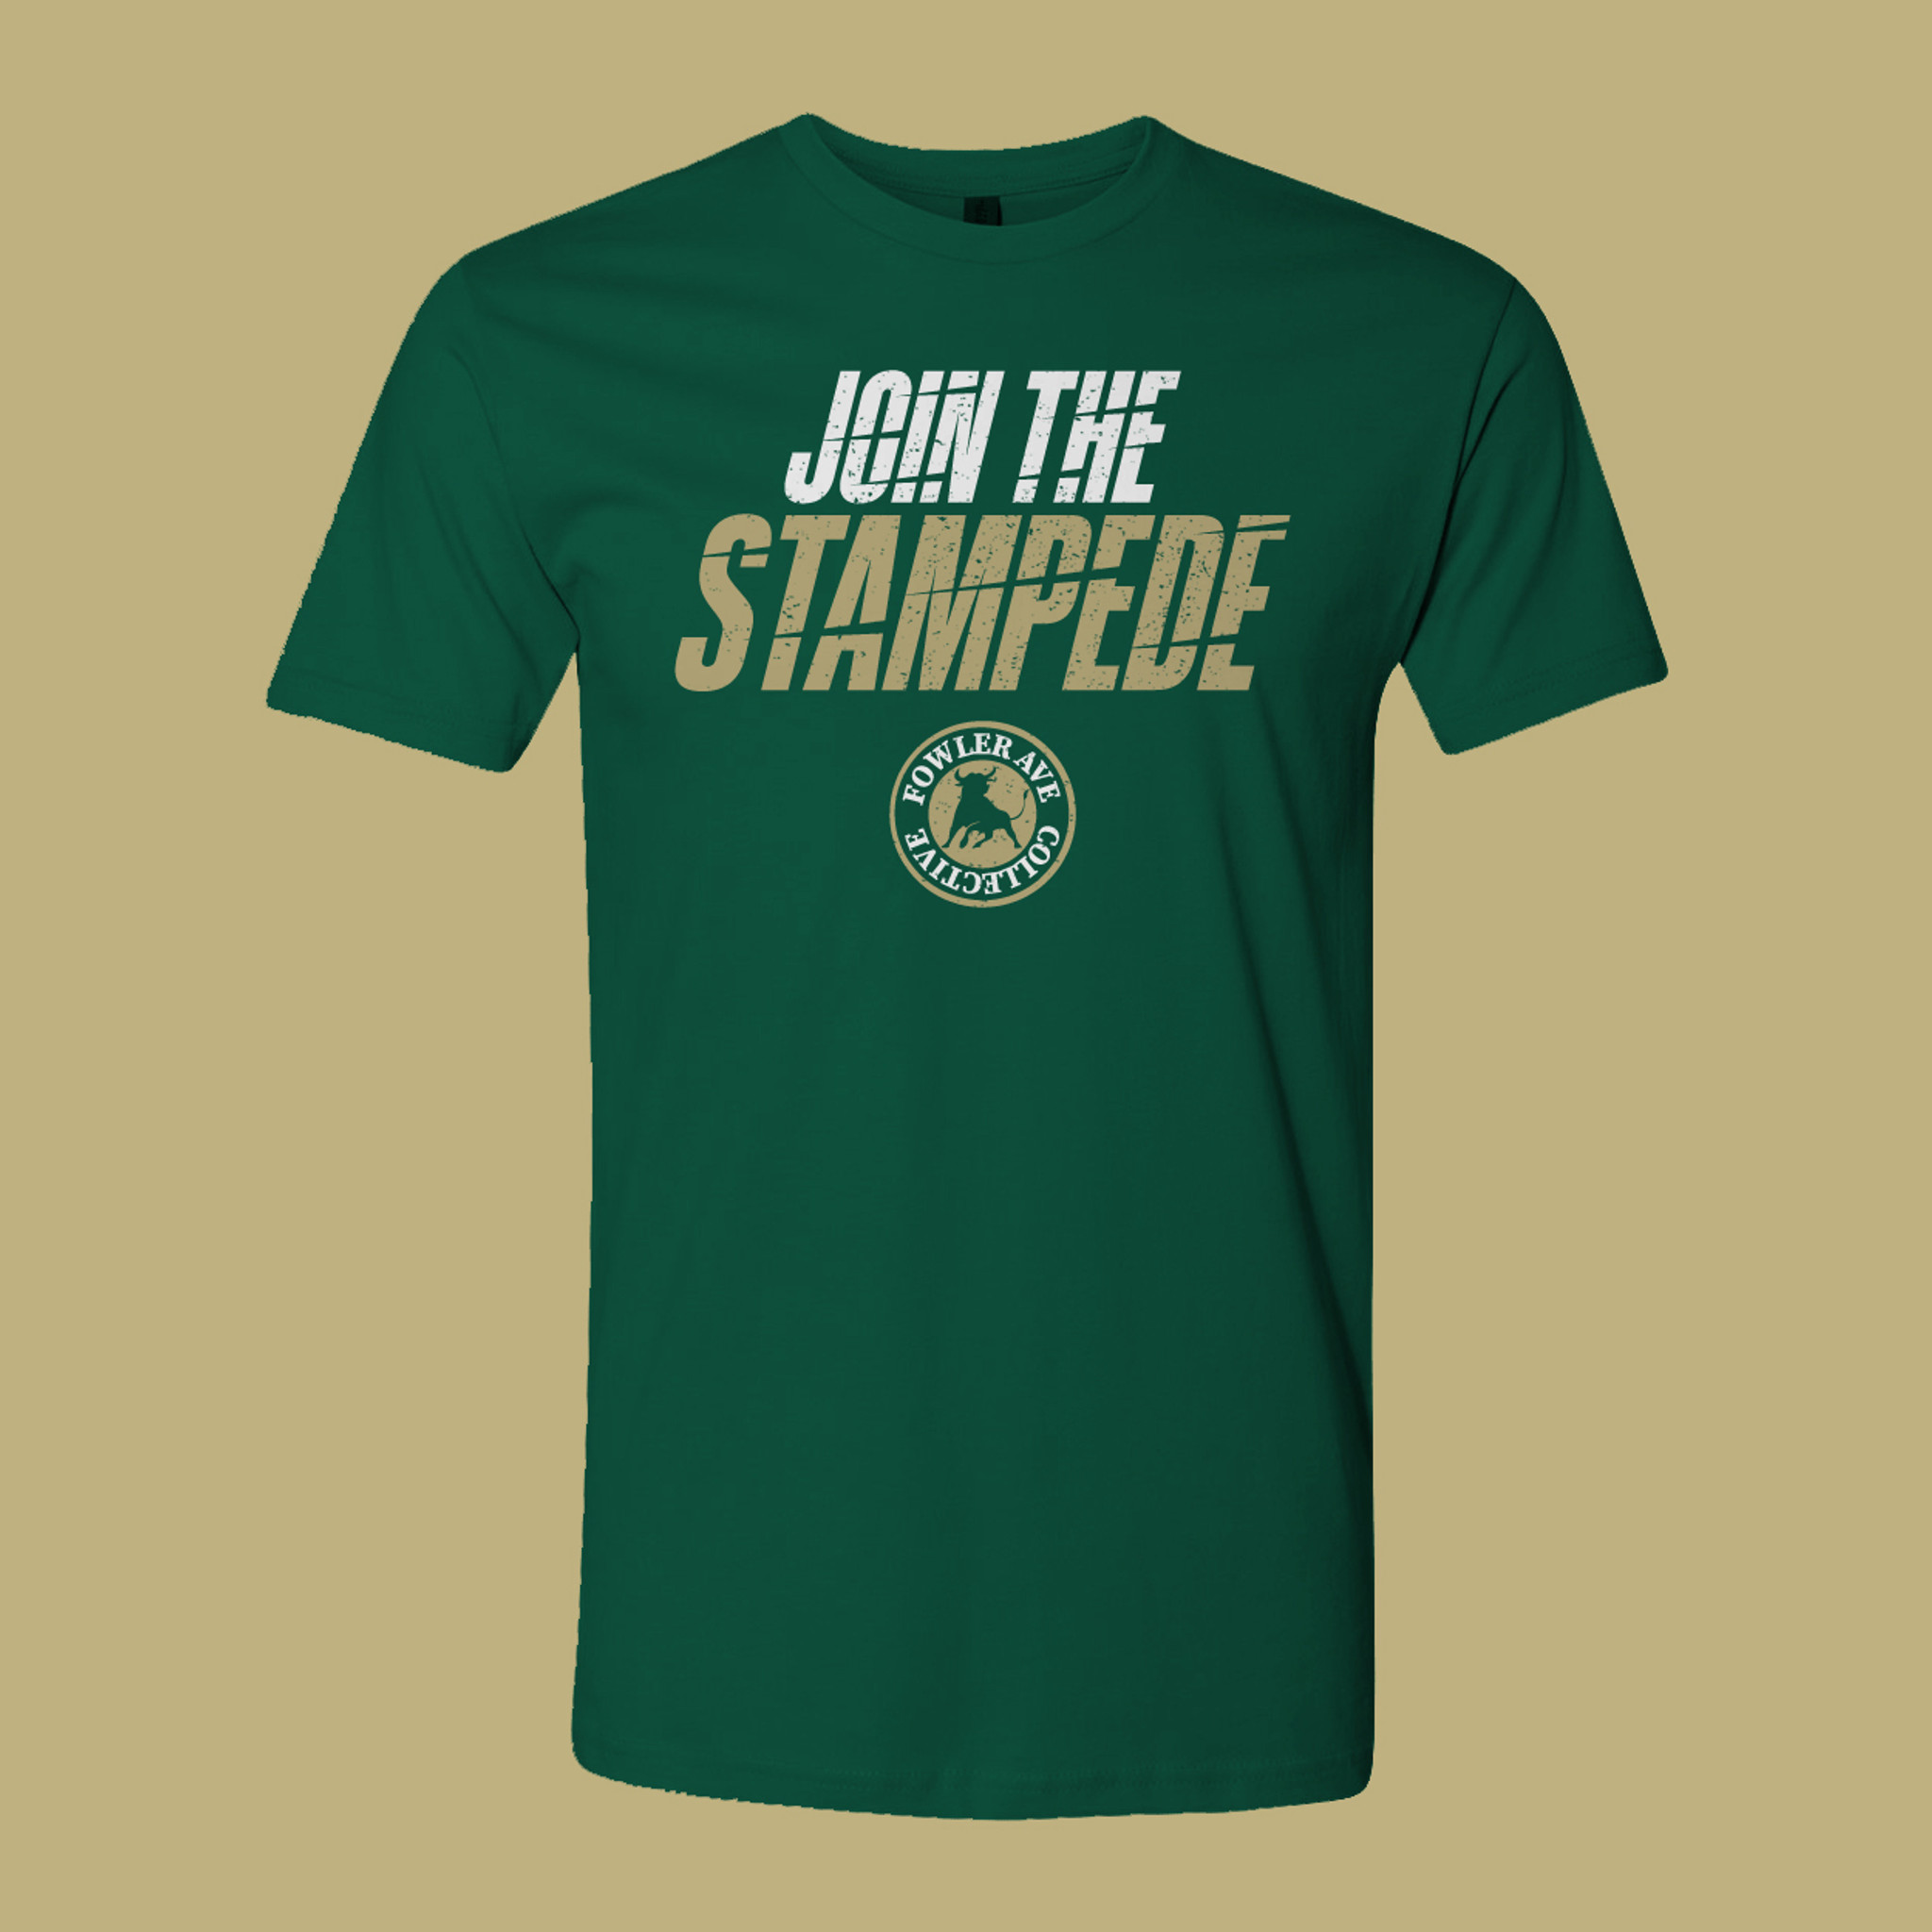 https://cdn11.bigcommerce.com/s-xlf2wk/images/stencil/2048x2048/products/159/704/Fowler-Ave-Collective-Join-The-Stampede-Shirt-15268__60372.1678385235.jpg?c=2